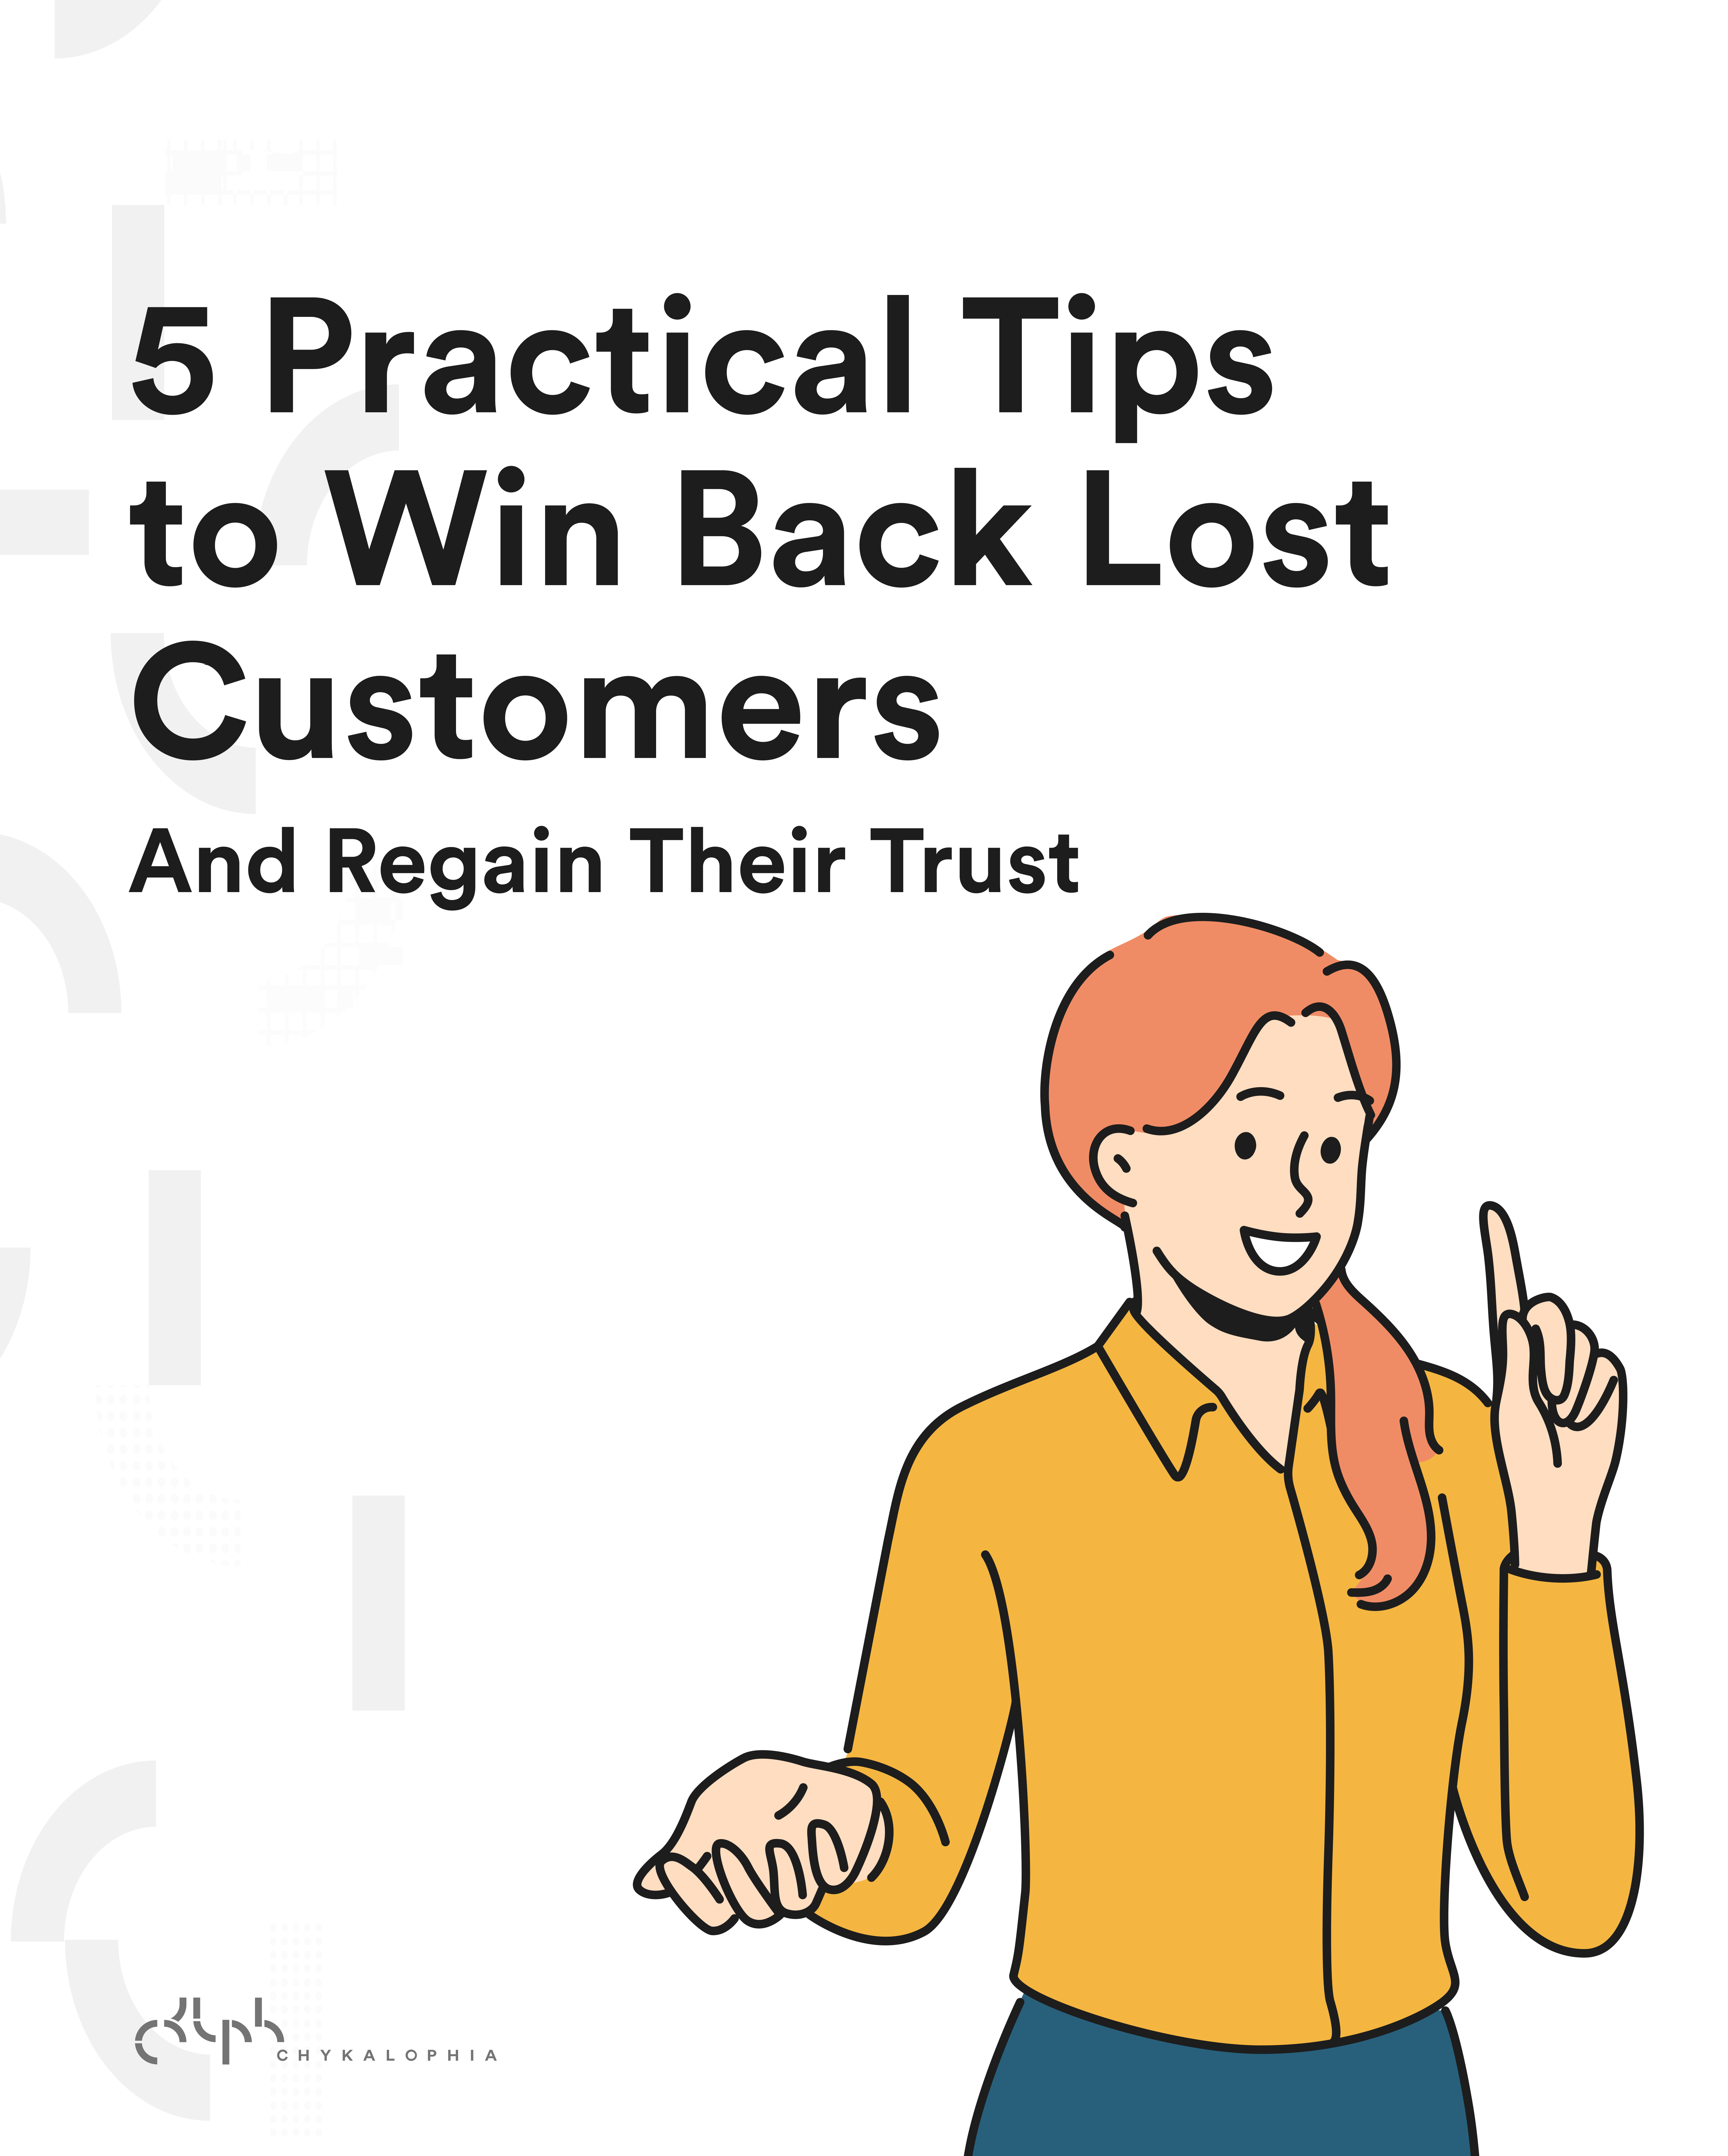 5 Tips to Win Back Lost Customers and Regain Customer Trust